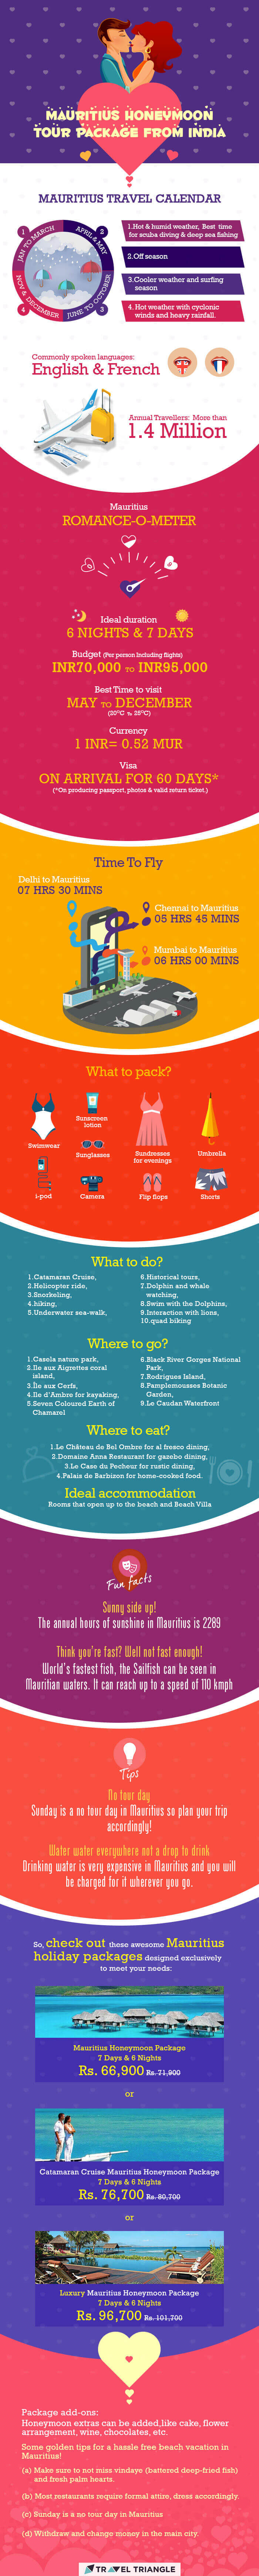 Save this infographic to help you plan the perfect Mauritius honeymoon package from India